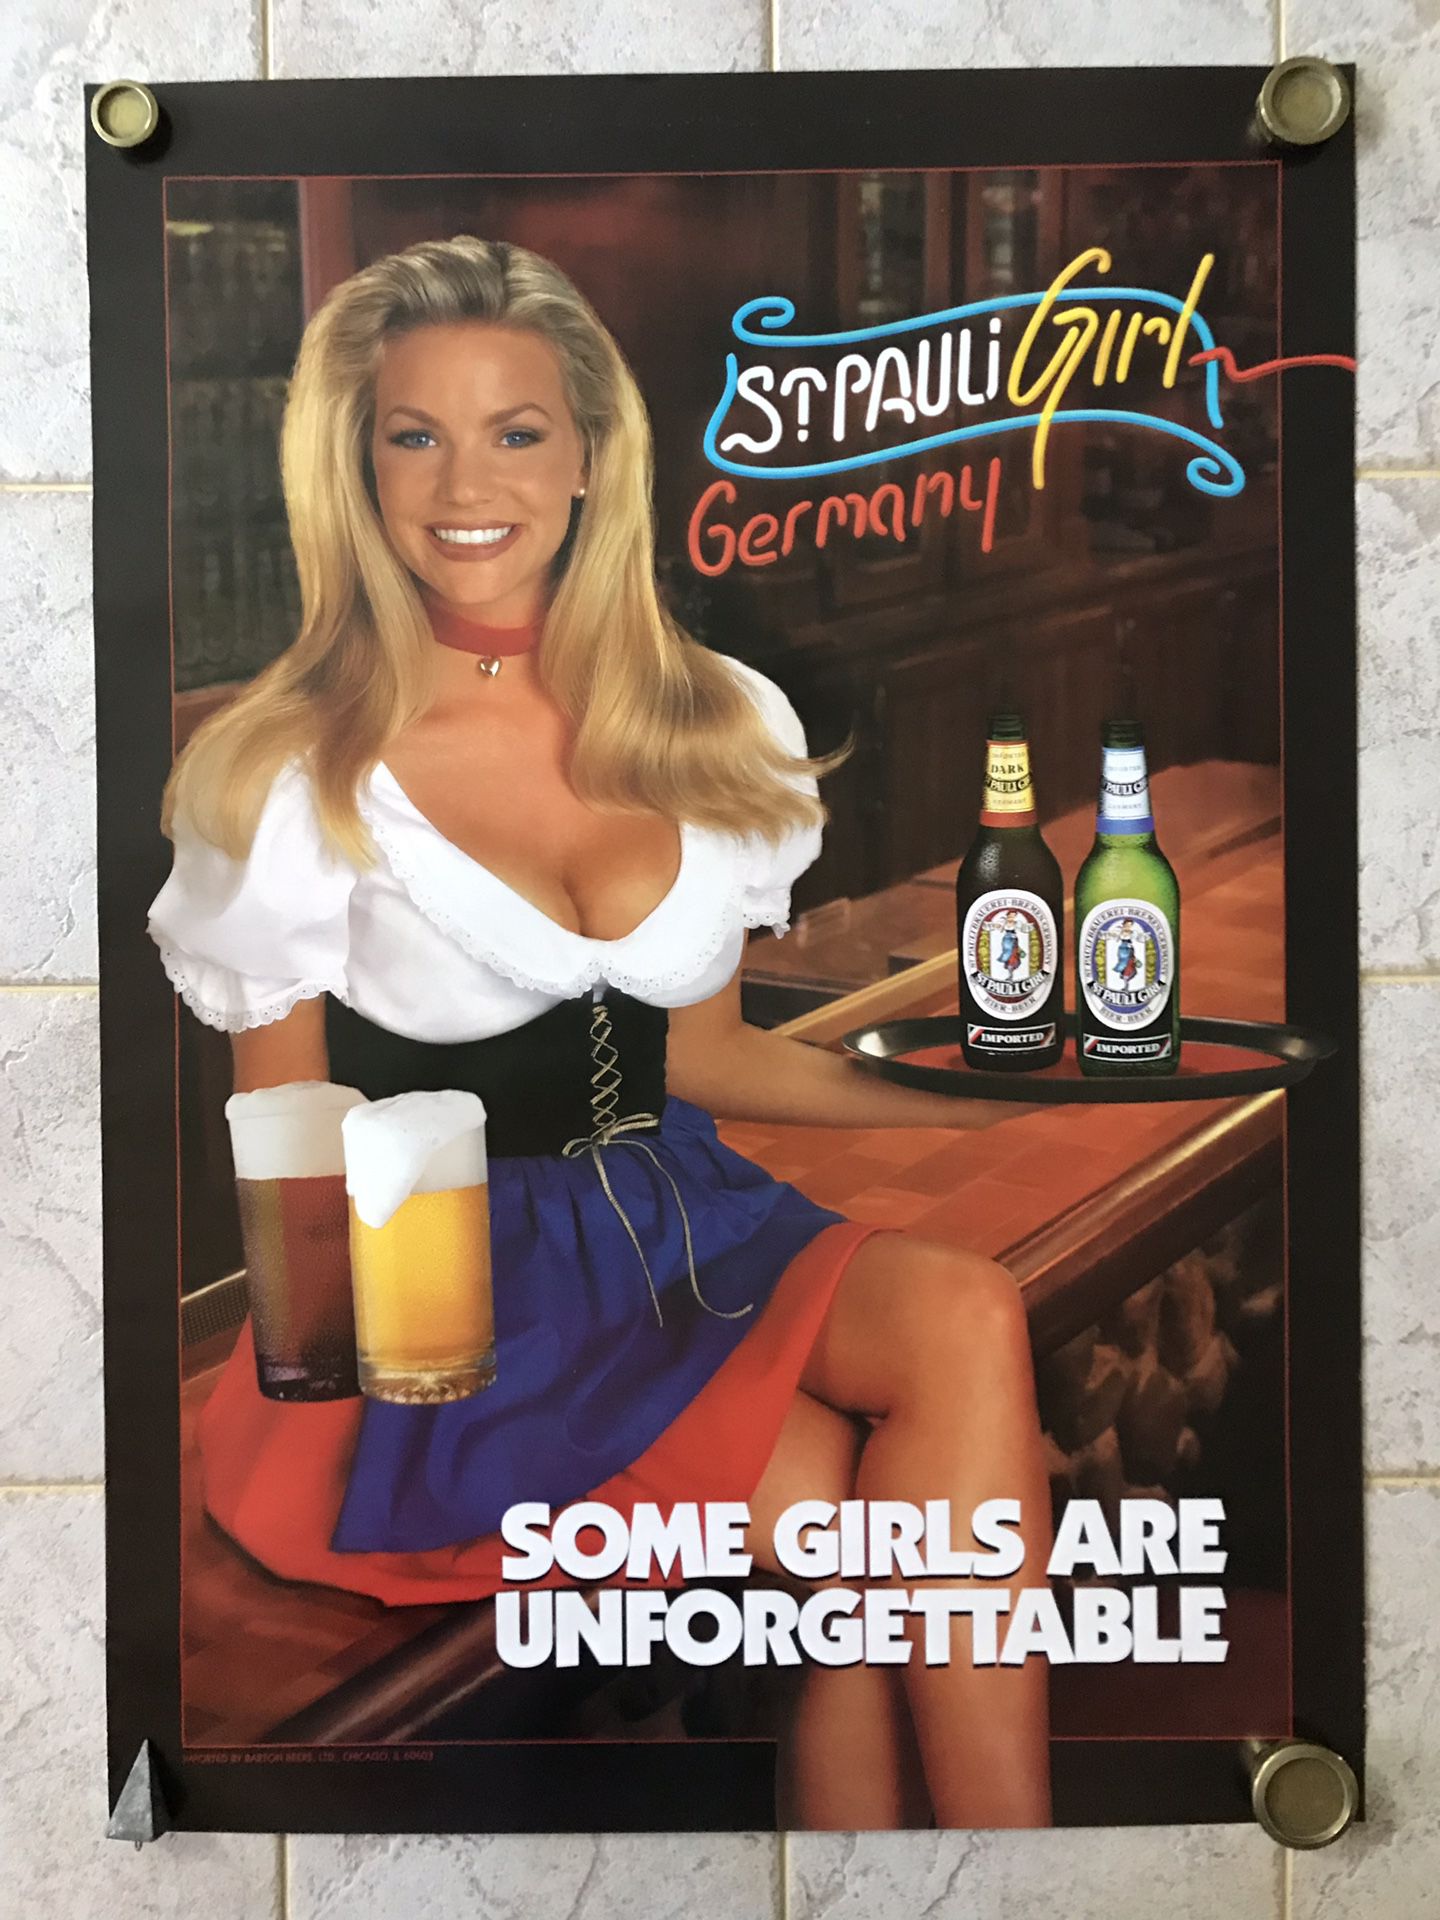 St Pauli Girl Beer Posters New For Sale In Middletown Ct Offerup